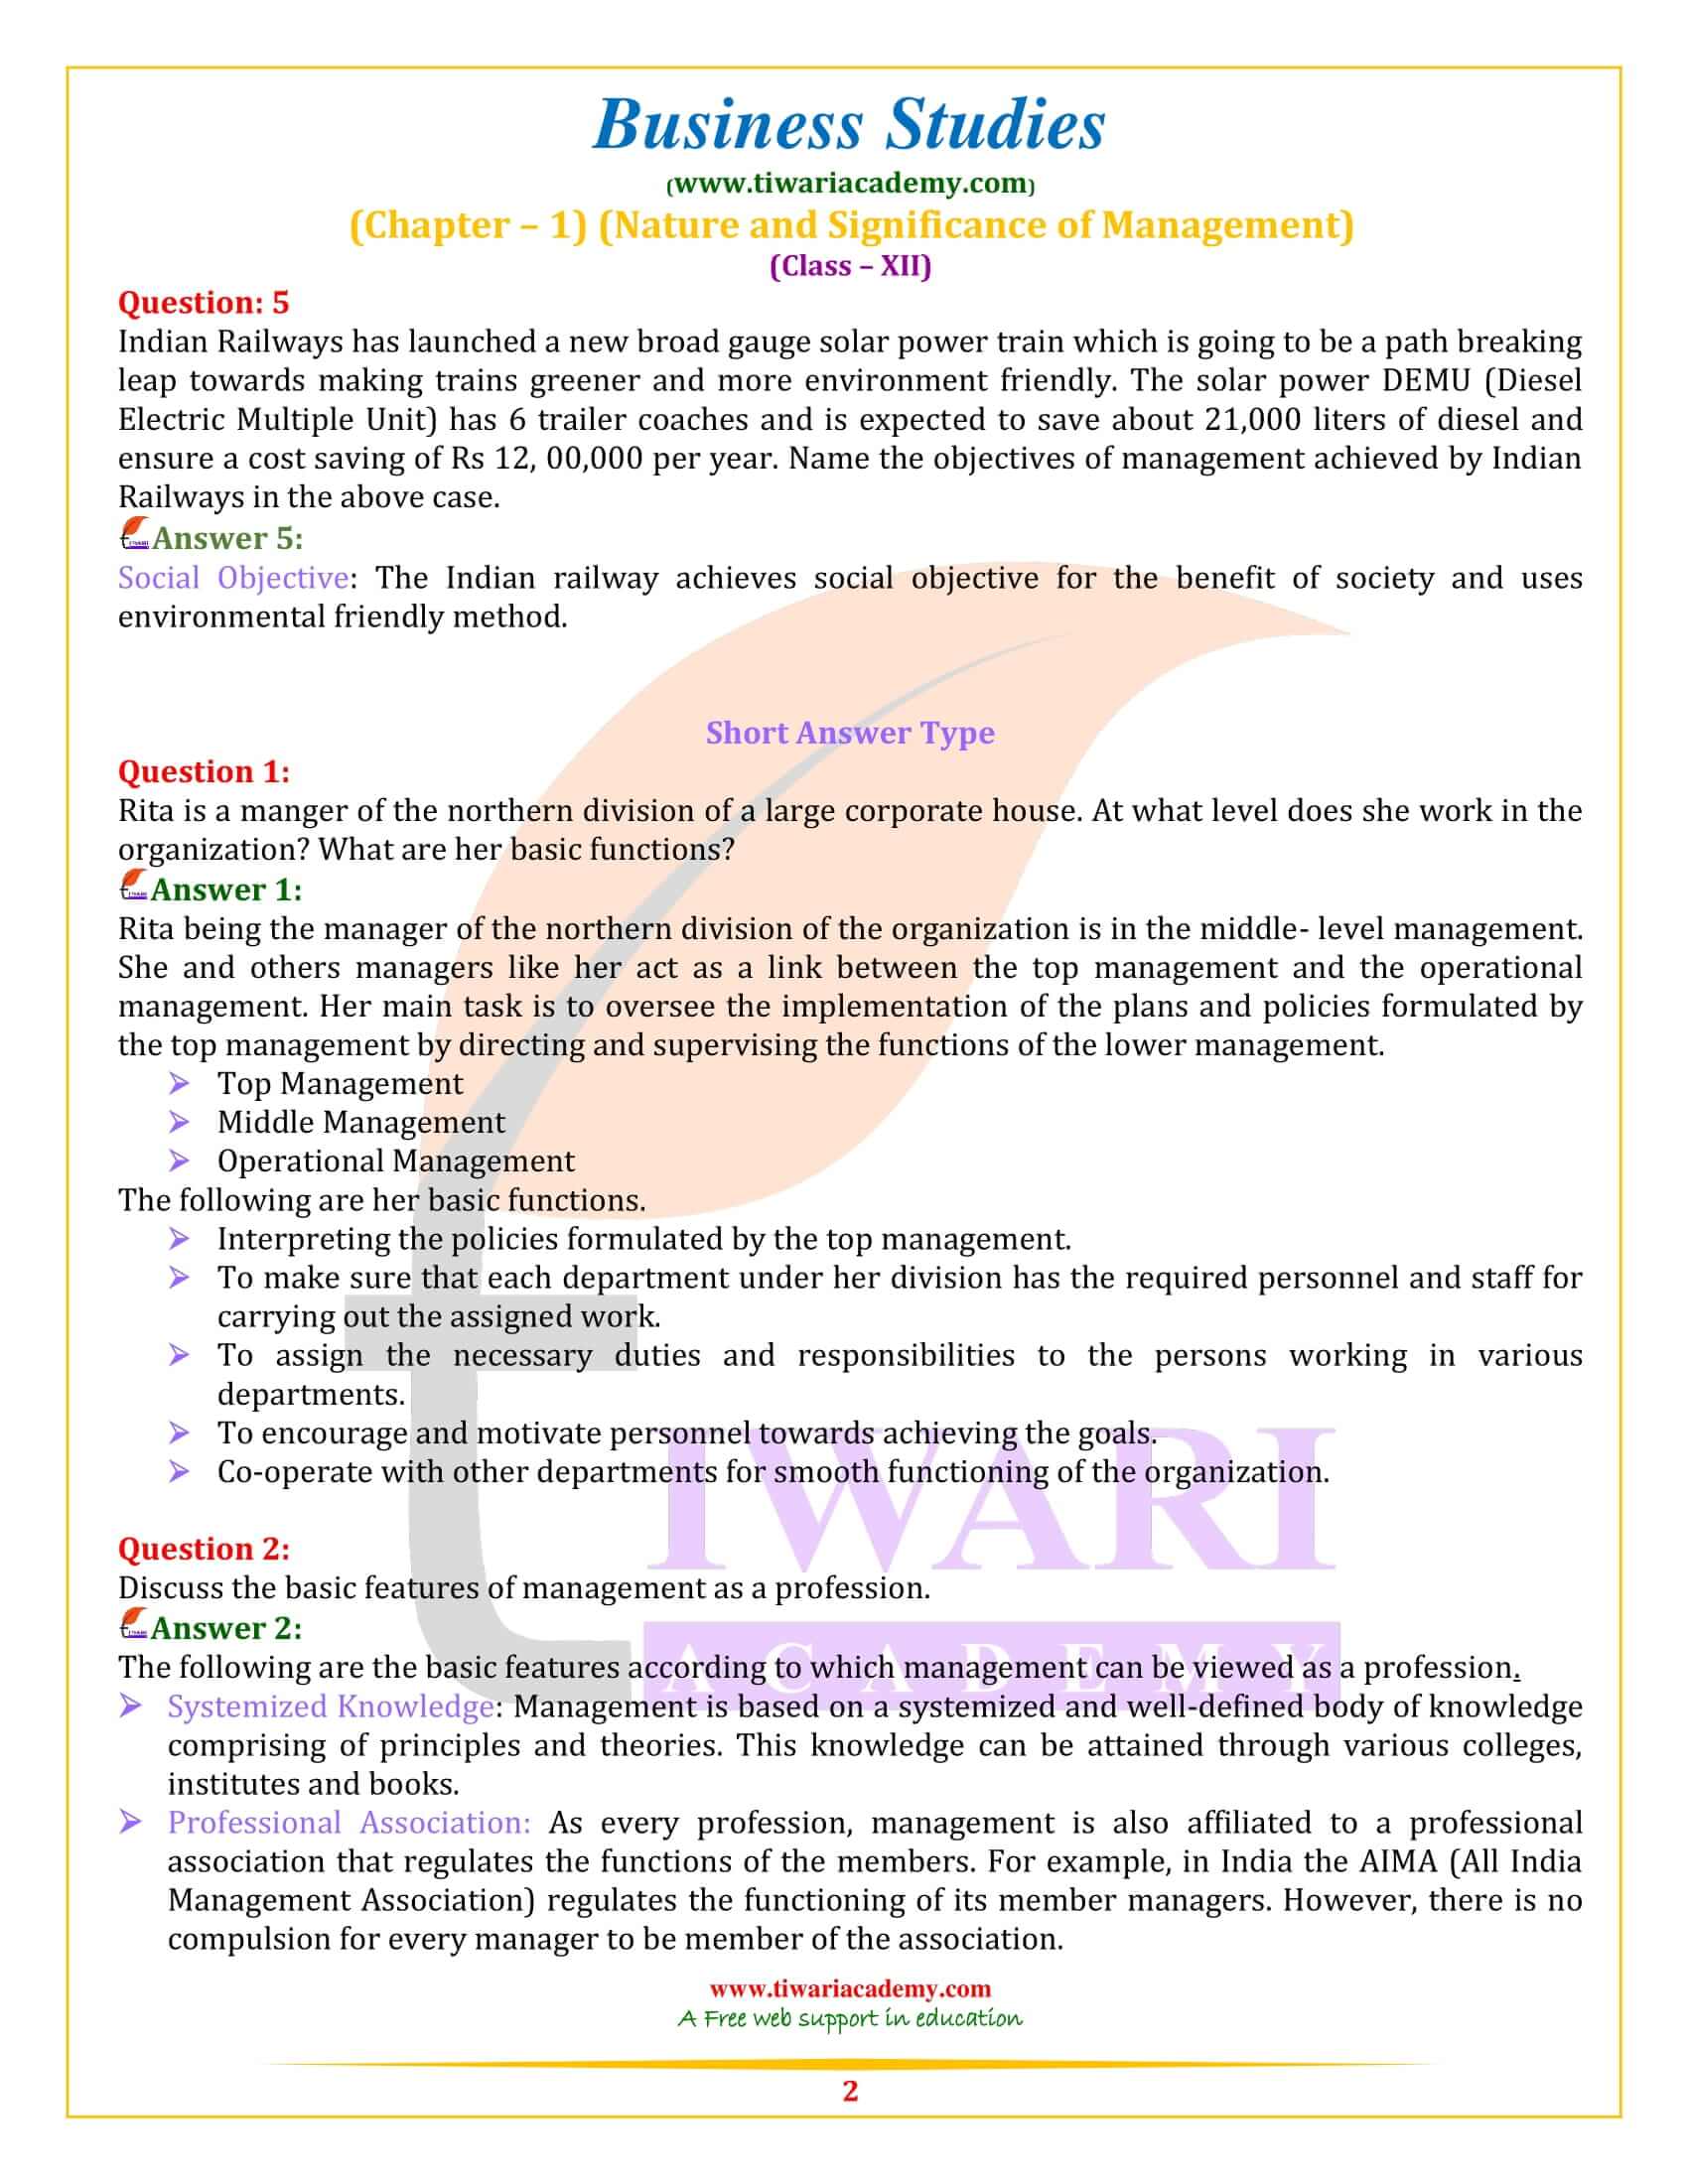 NCERT Solutions for Class 12 Business Studies Chapter 1